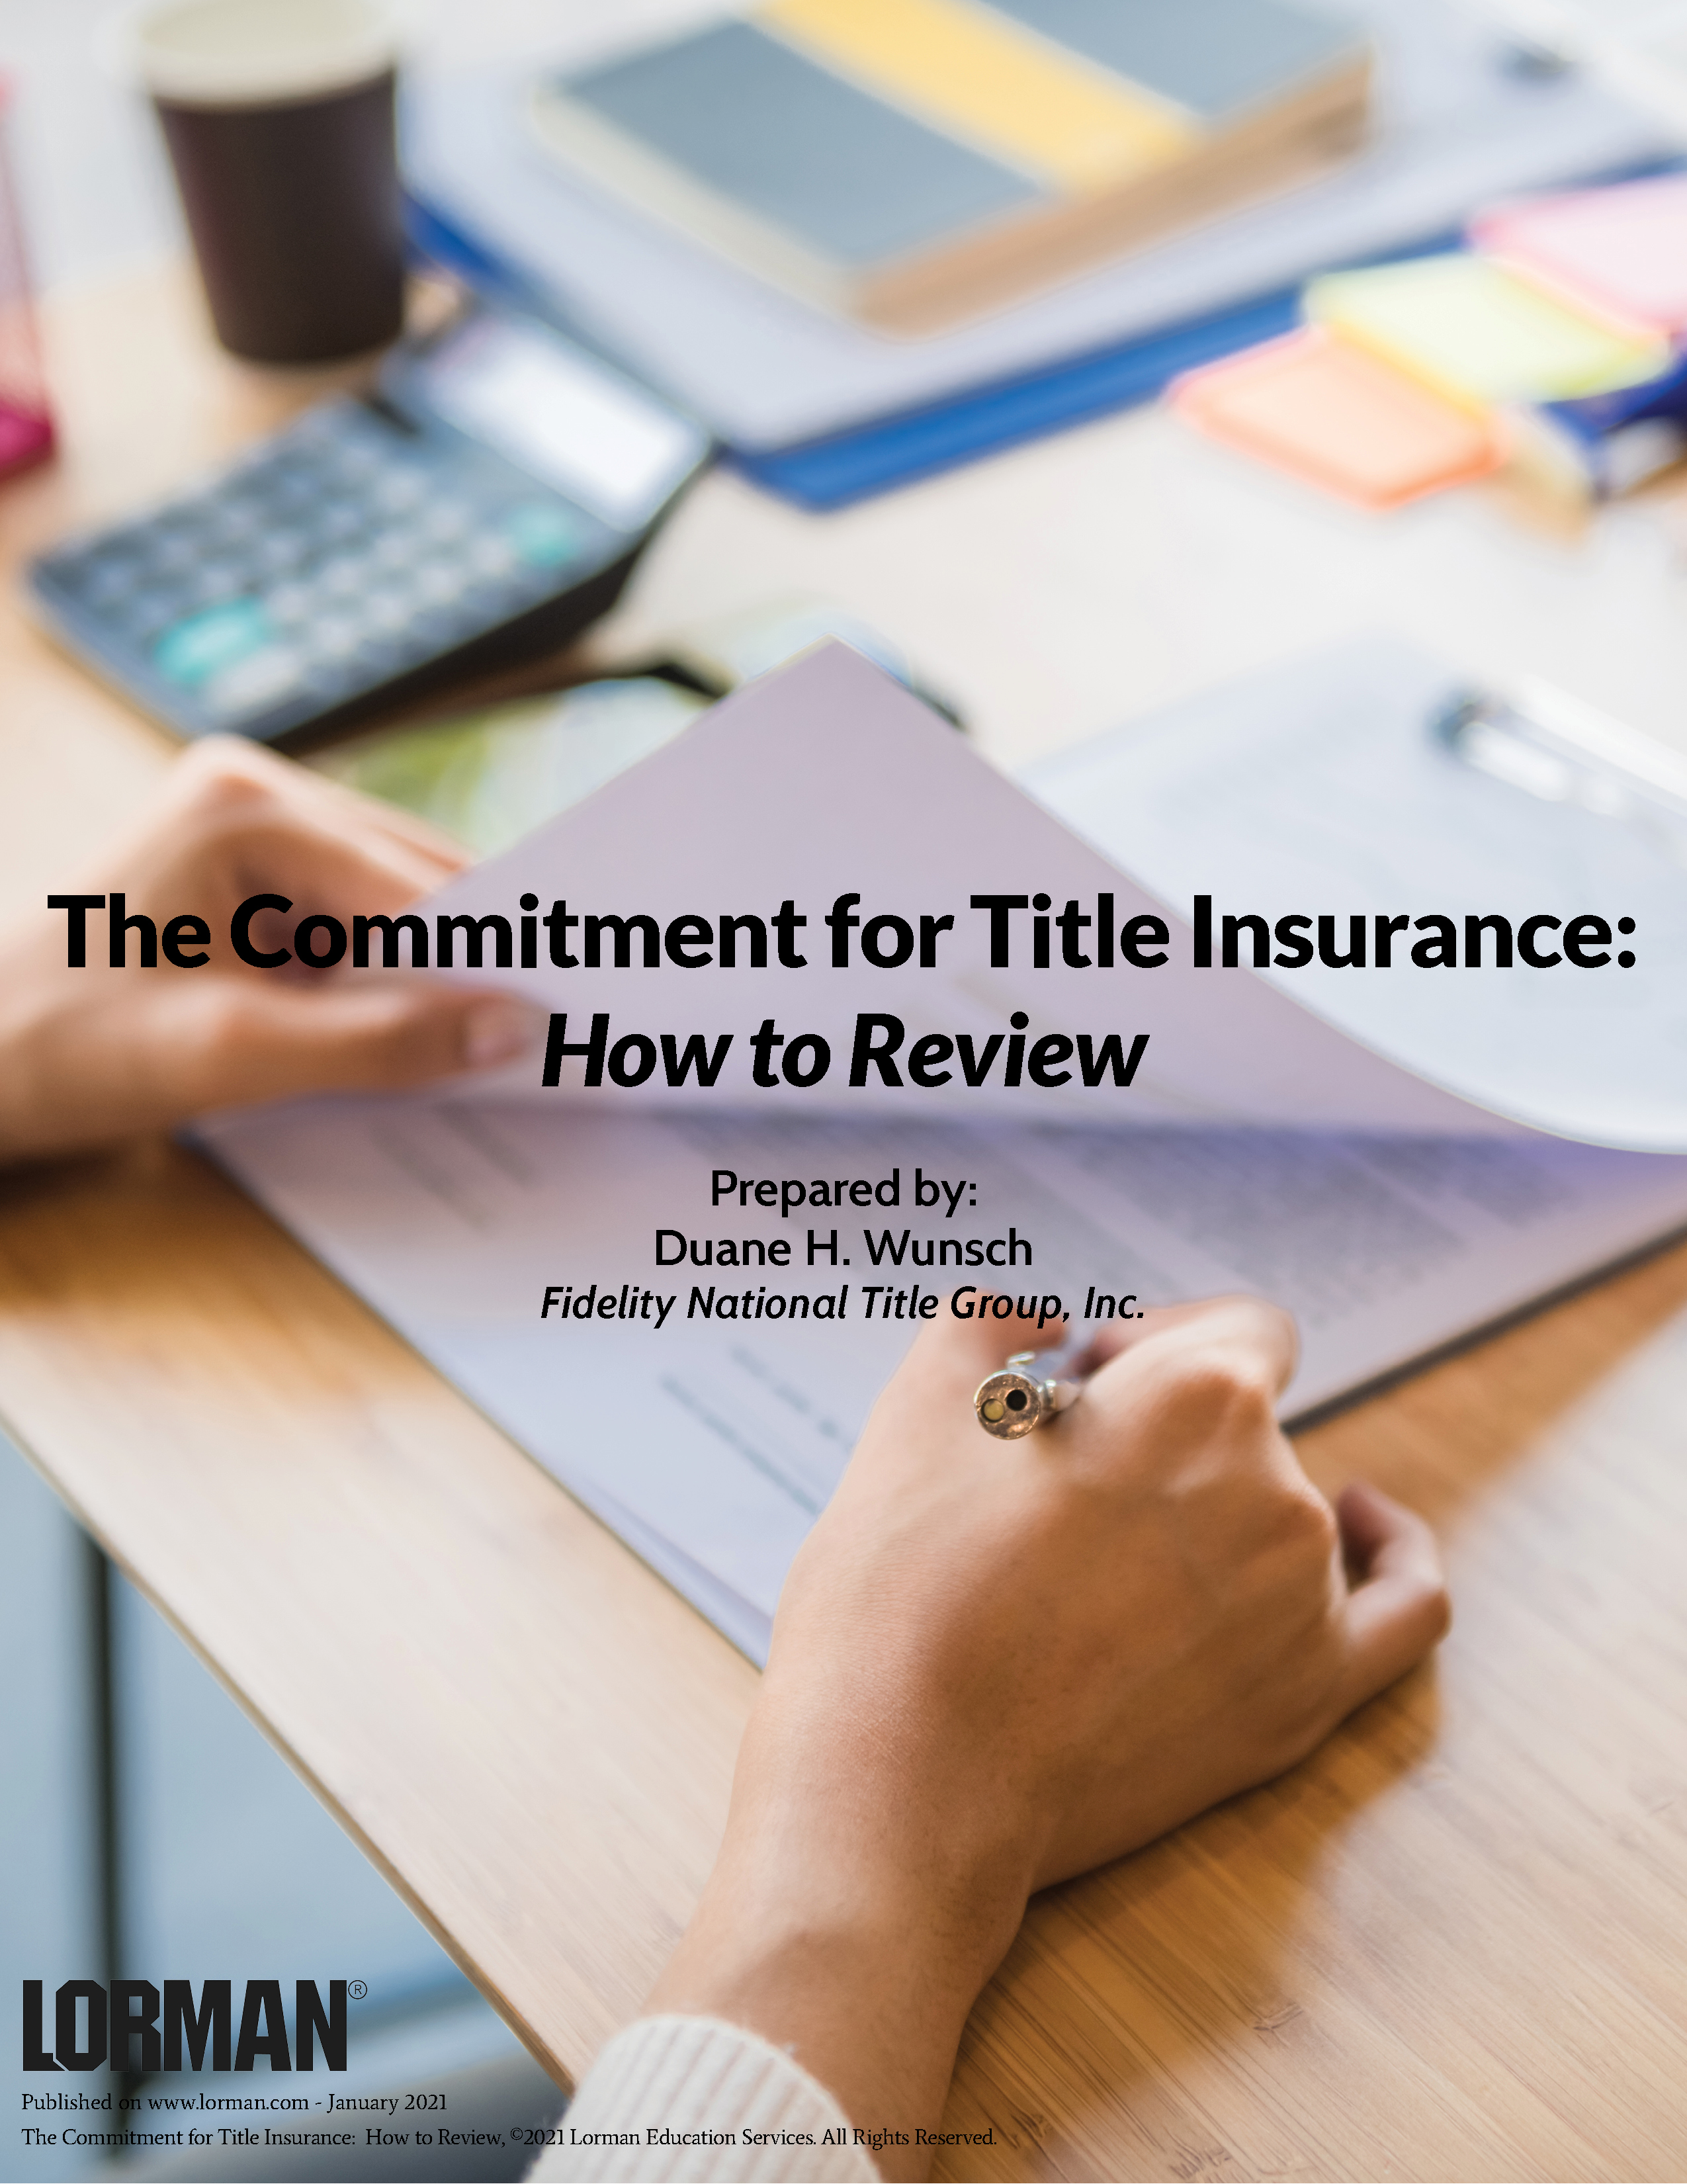 The Commitment for Title Insurance: How to Review